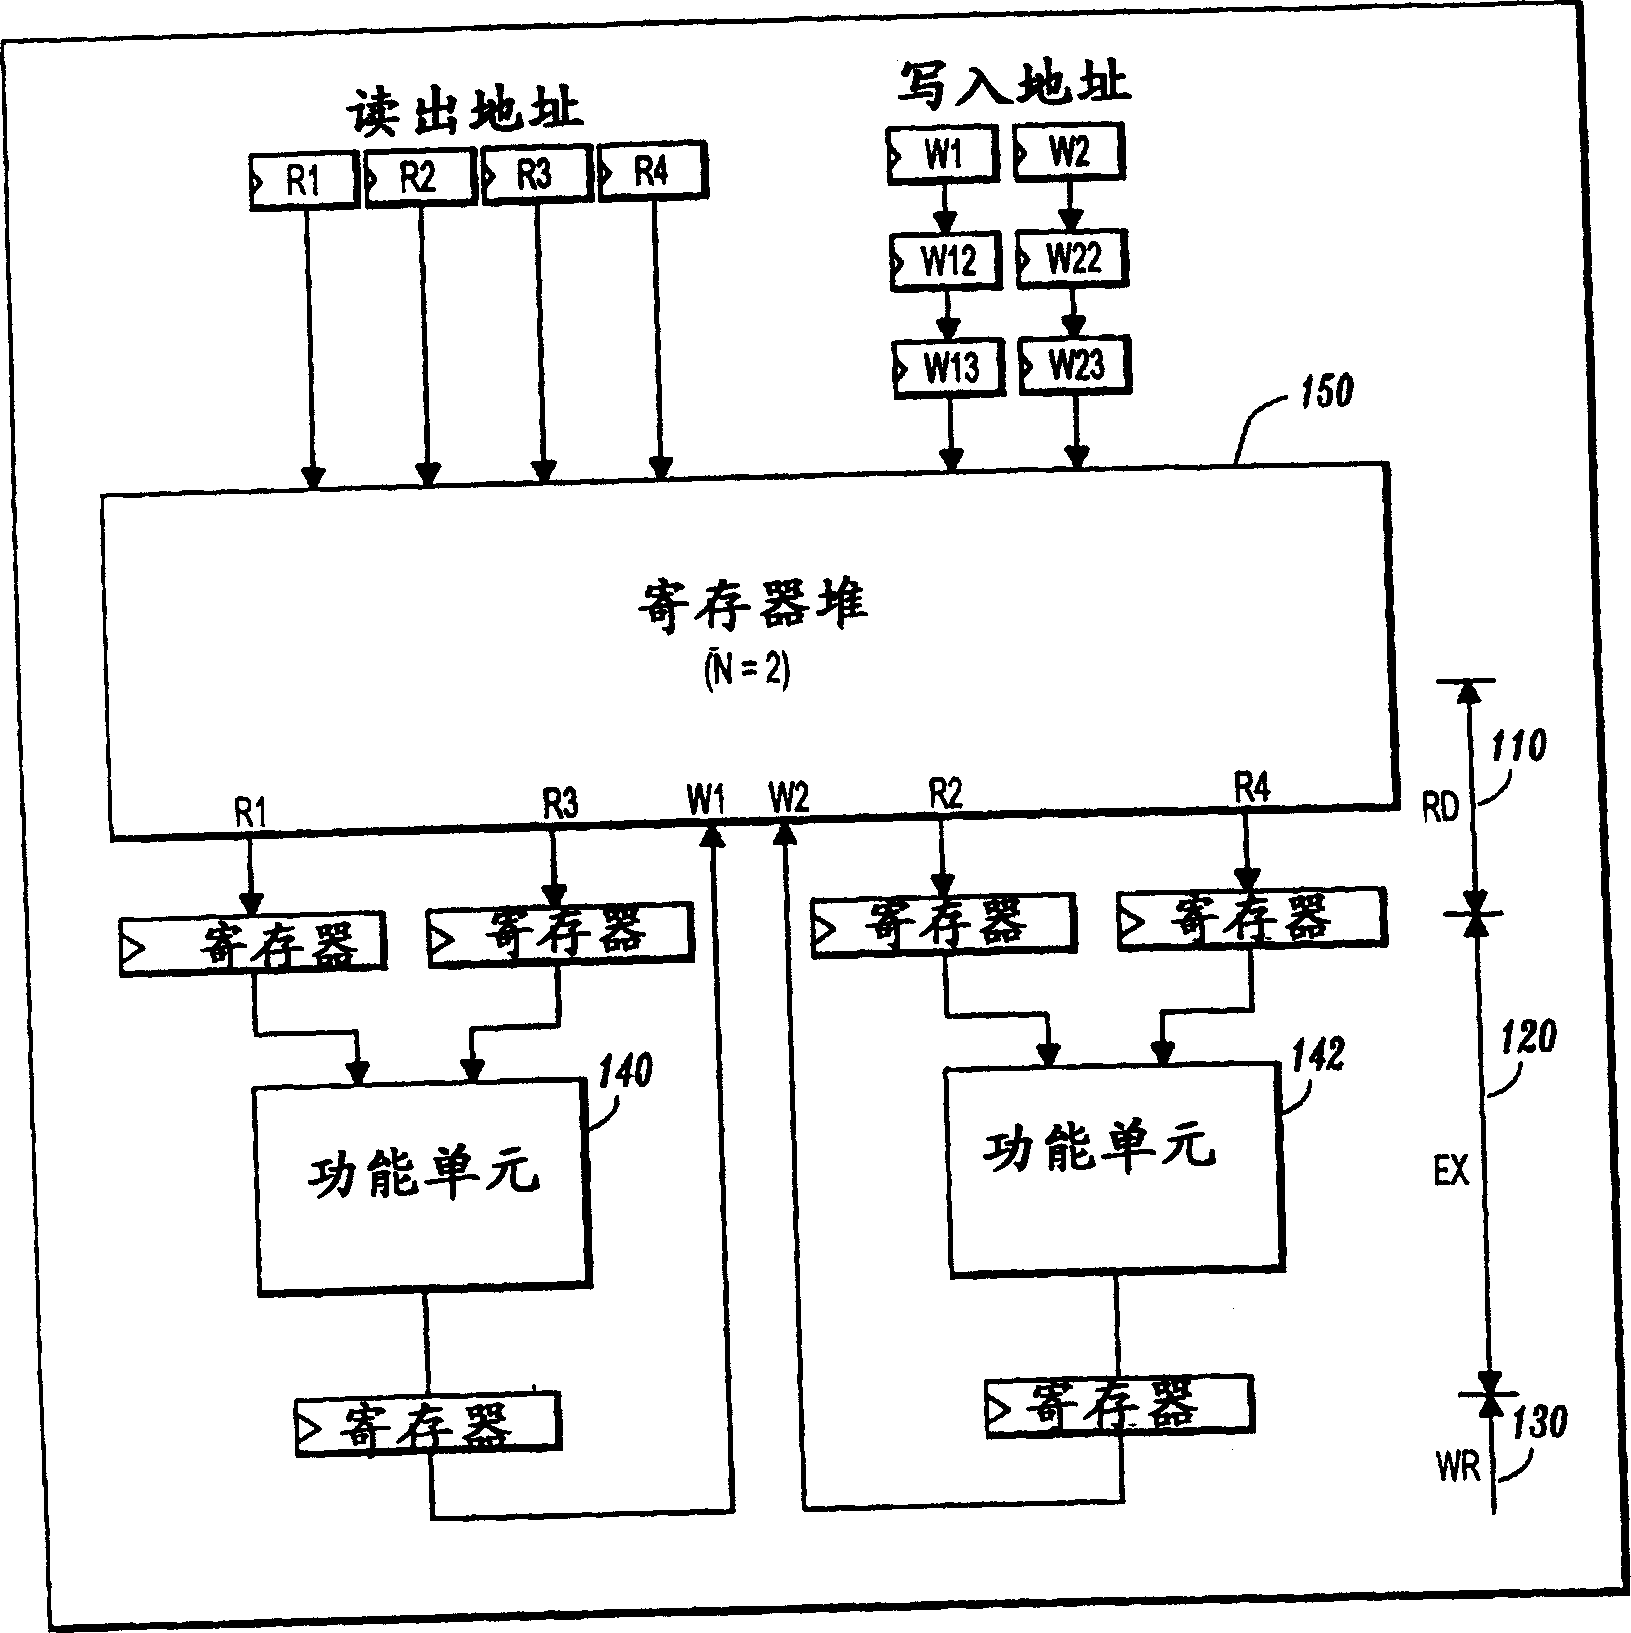 Method of selecting by pass of multiport register pile and equipment